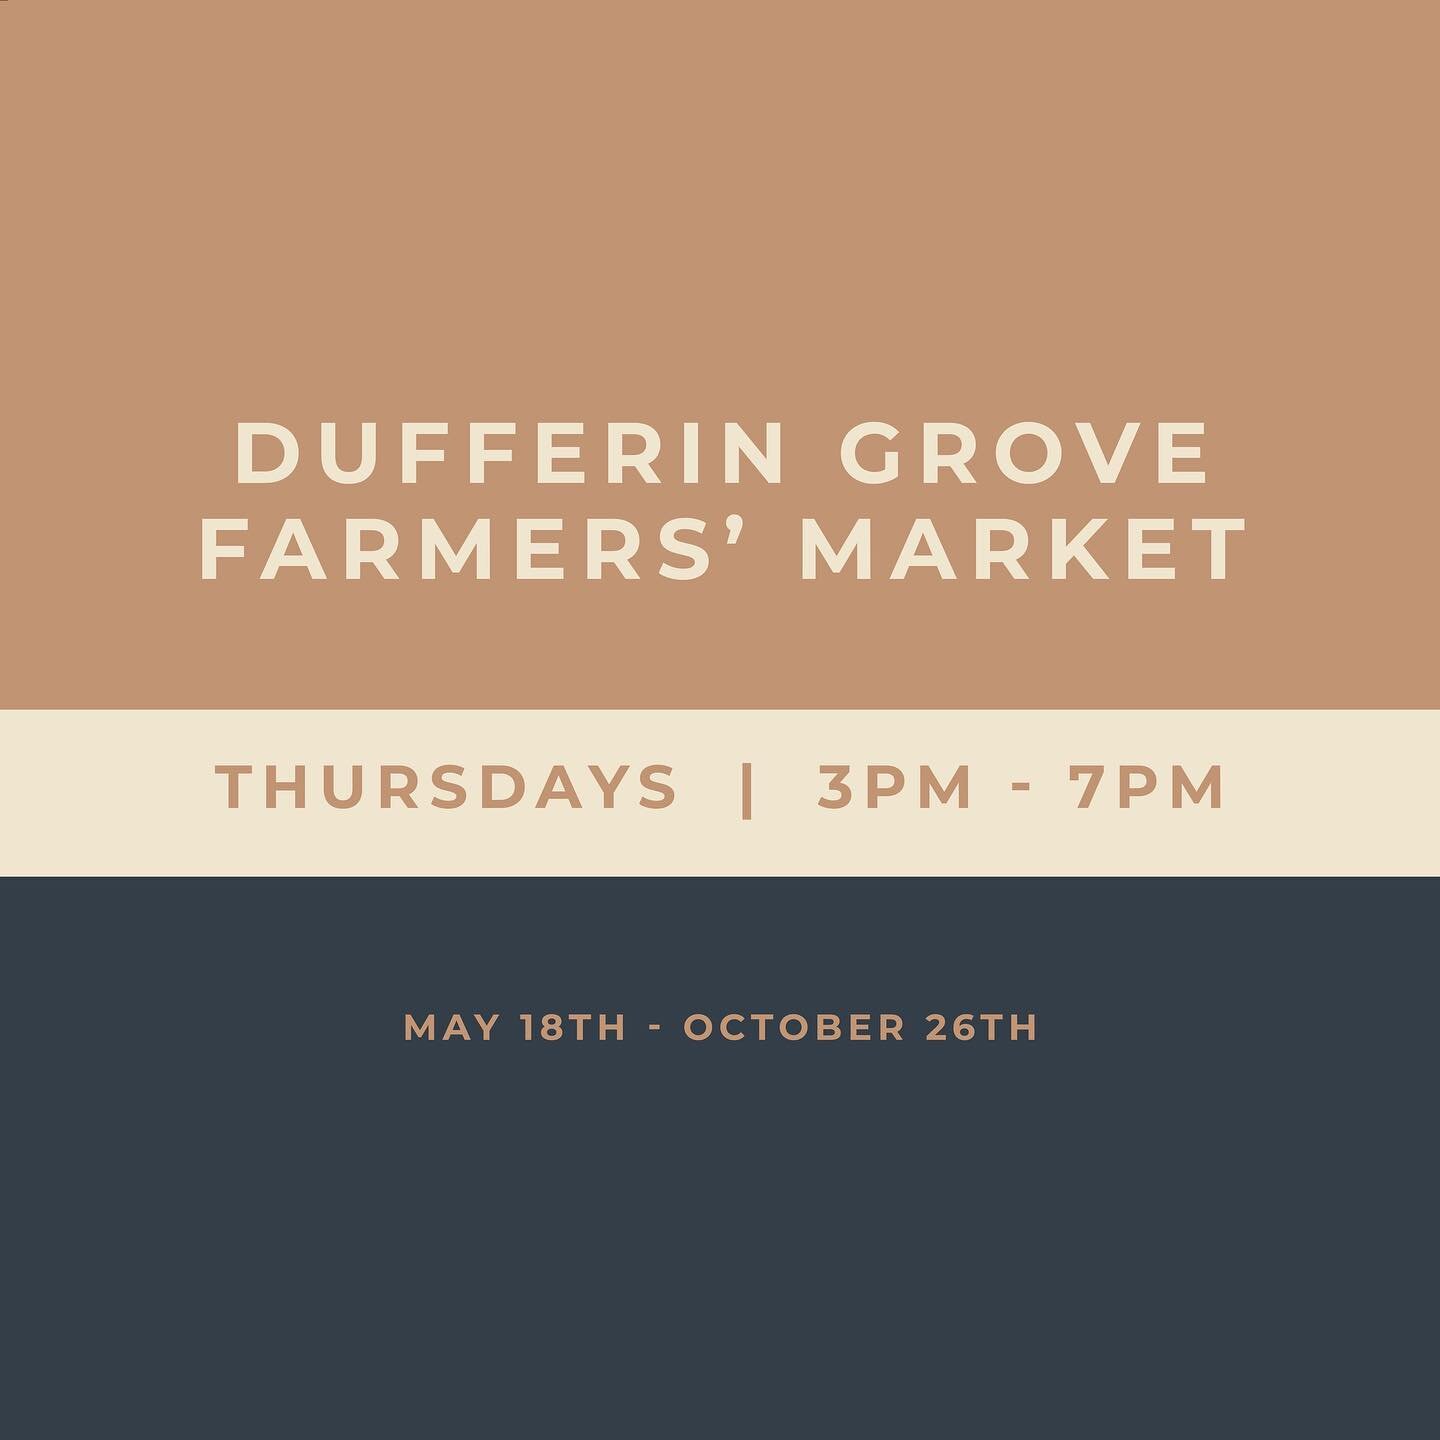 FARMERS&rsquo; MARKET SEASON IS BACK! We&rsquo;re so excited to be back at @dufferingrovemarket every Thursday from 3pm- 7pm! Mark your calendars for the first market of the season - NEXT Thursday, May 18th! 

Can&rsquo;t make it on Thursdays? You&rs